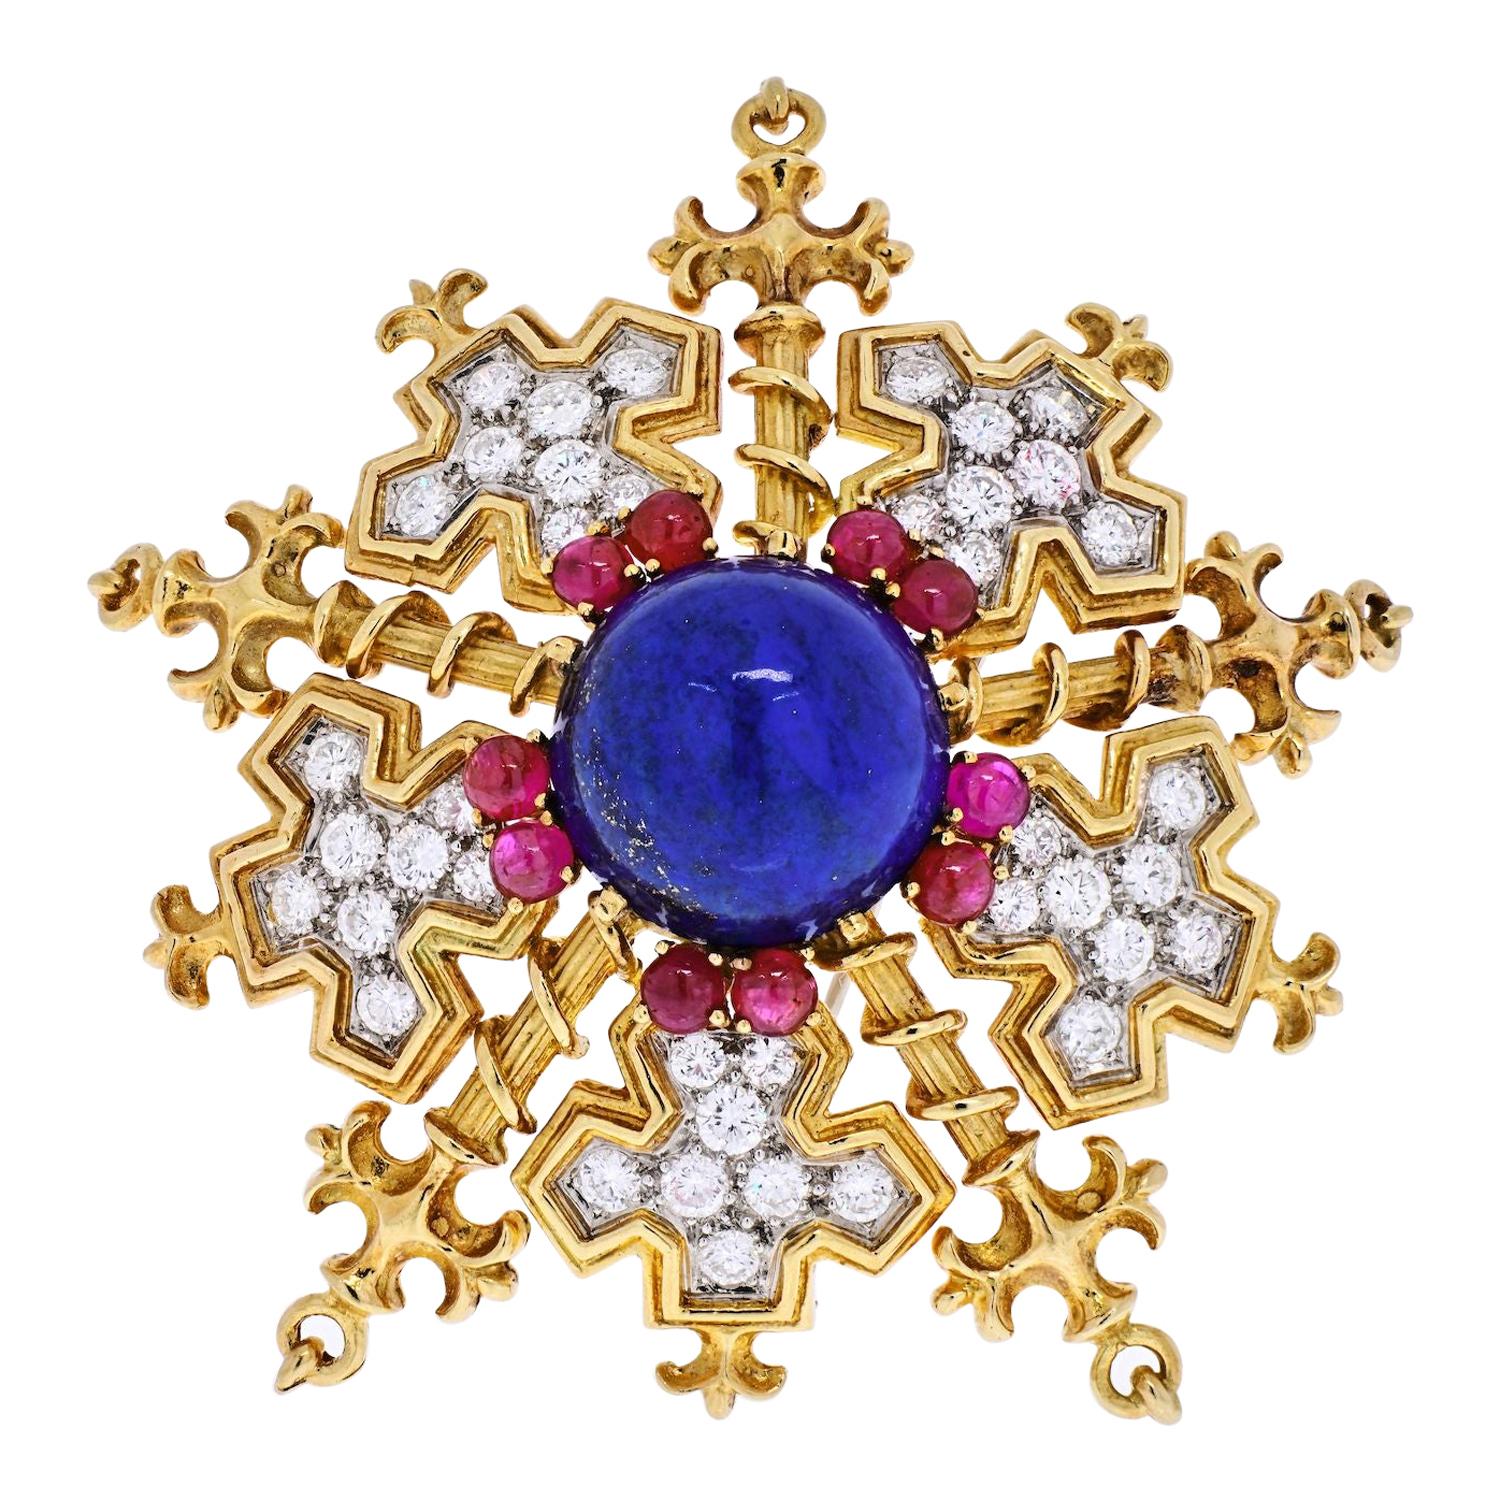 Tiffany & Co. 18k Yellow Gold Snowflake with Lapis, Rubies and Diamonds Brooch